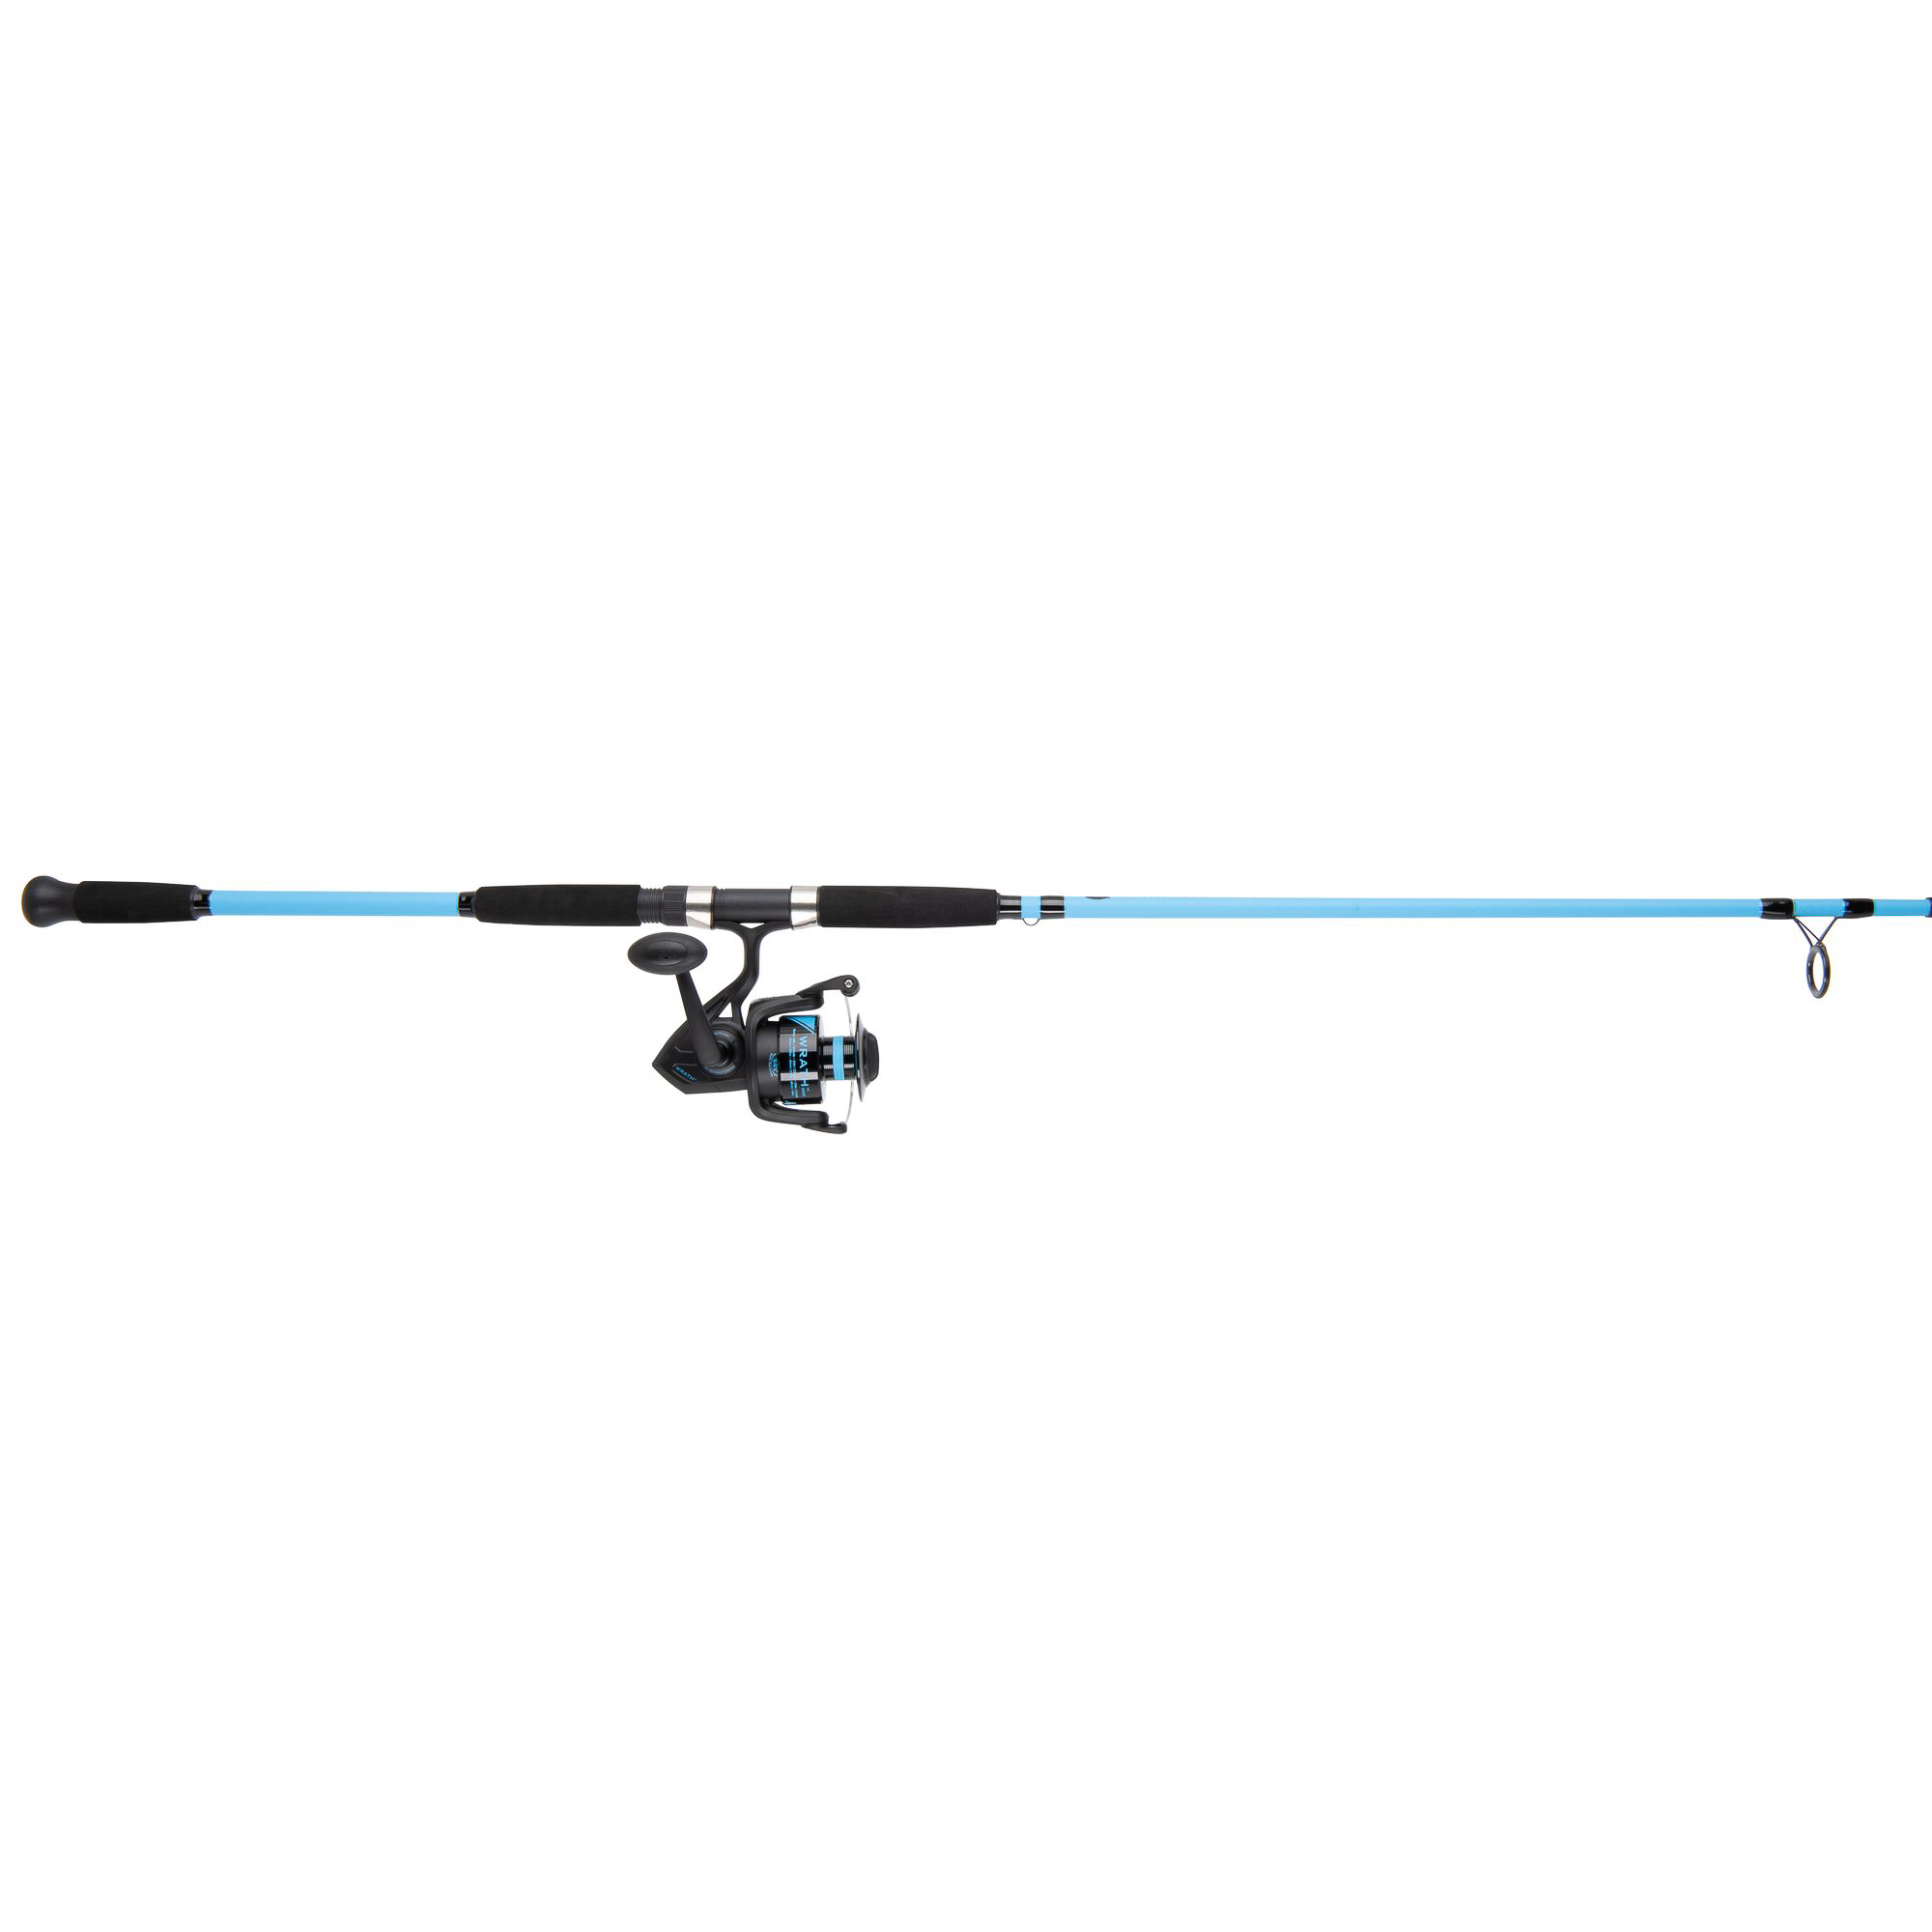 PENN 9 Ft. Wrath Fishing Rod and Reel Spinning Combo - image 5 of 5